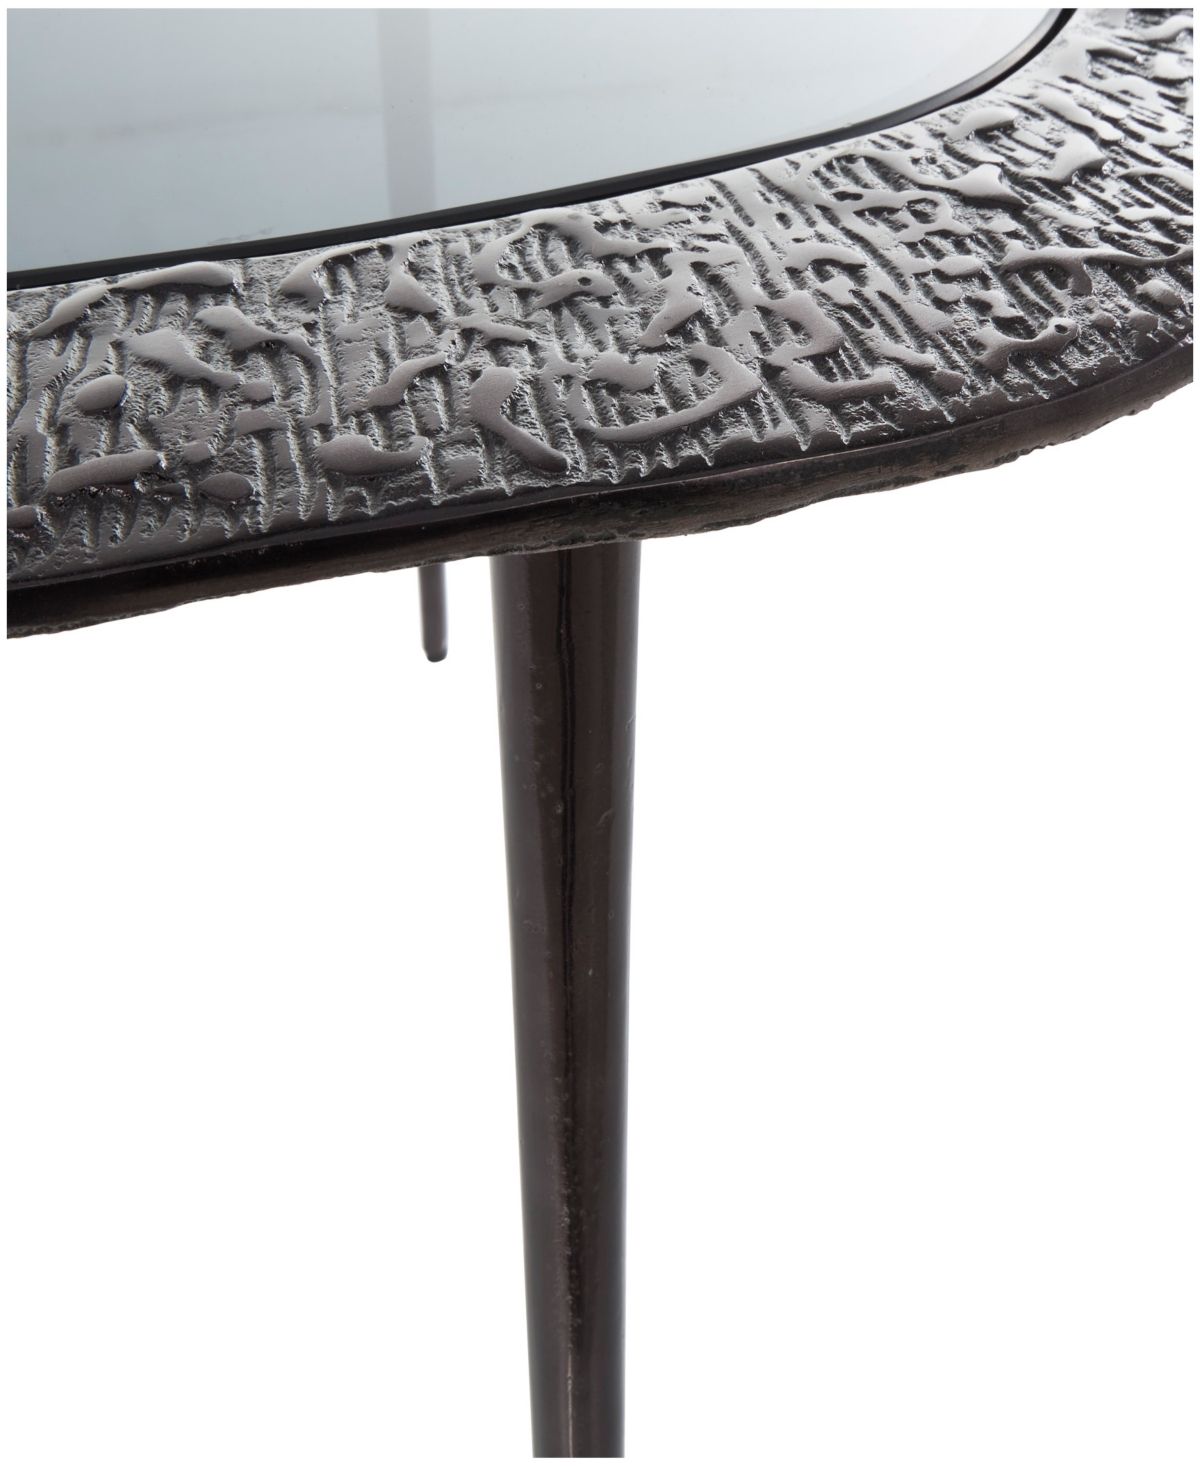 Shop Rosemary Lane 30" X 25" X 18" Aluminum Abstract Oval Shaped Shaded Glass Top And Detailed Engravings Coffee Table In Black